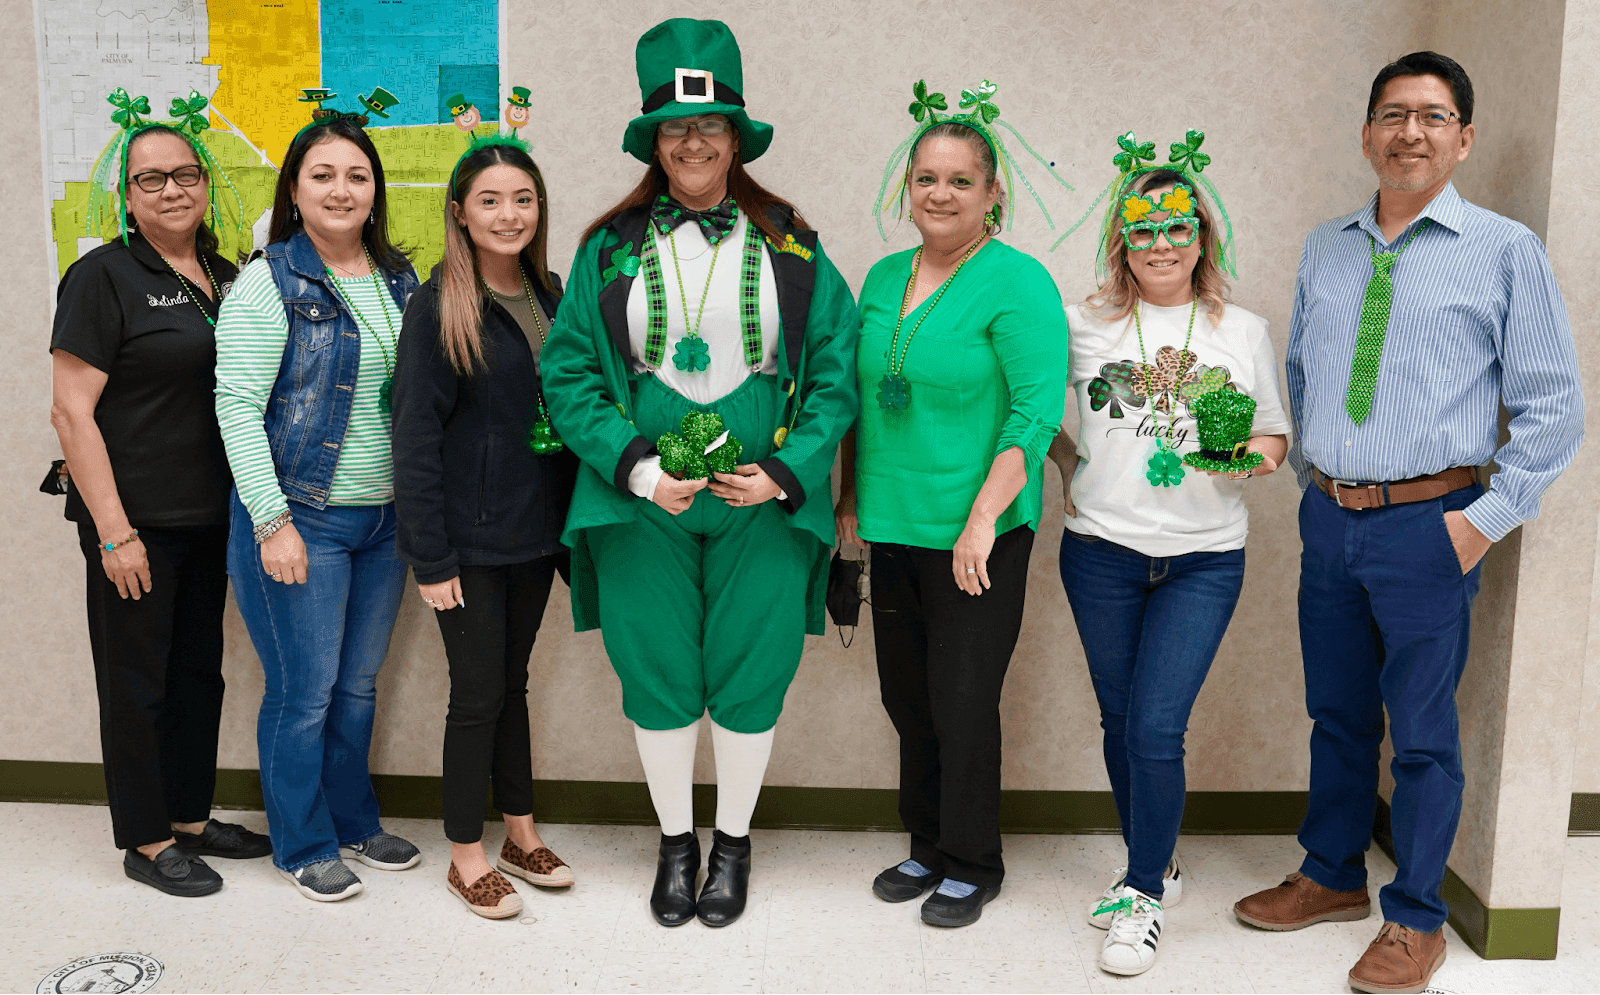 Staff members dressed up for a St. Patrick's day theme